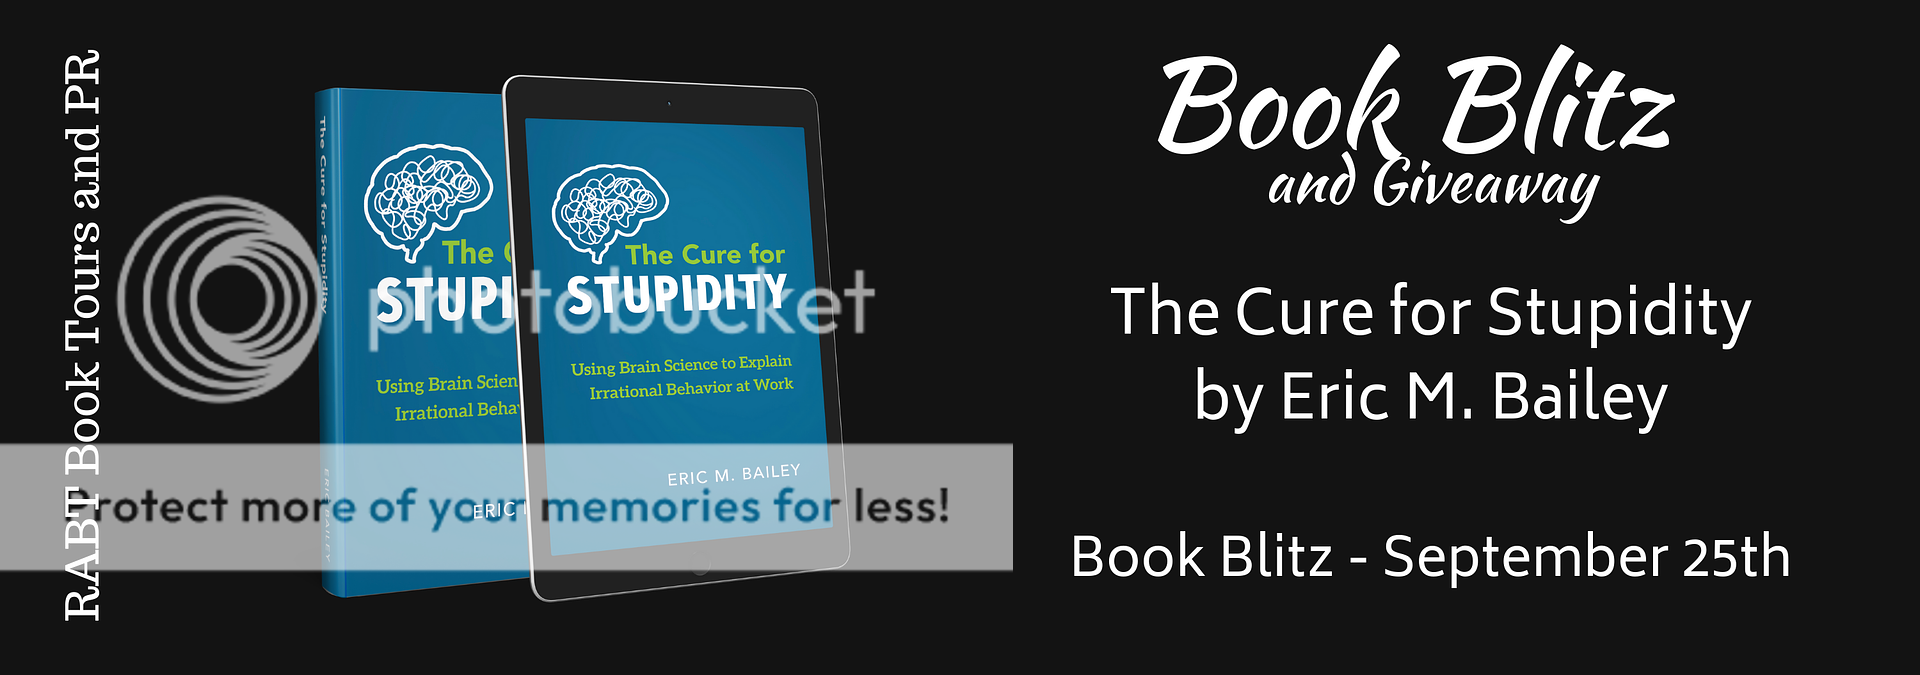 Book Blitz for The Cure for Stupidity by Eric M. Bailey @eric_m_bailey #nonfiction #selfhelp #giveaway @RABTBookTours